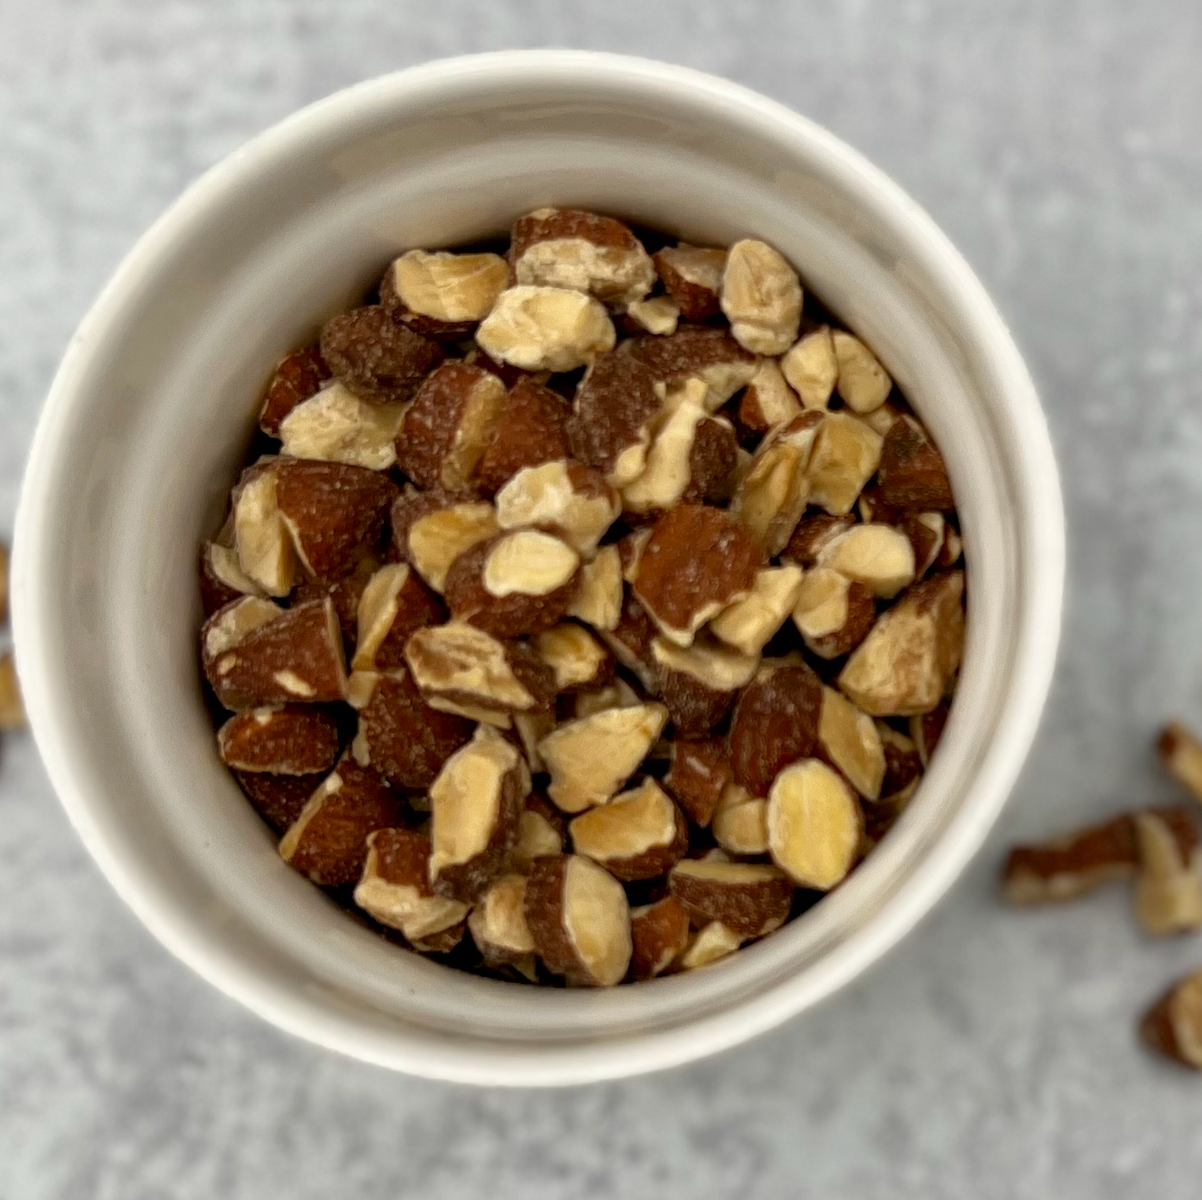 Almonds - Roasted and Diced, California Grown, Organic, "Almond Butter Stock"